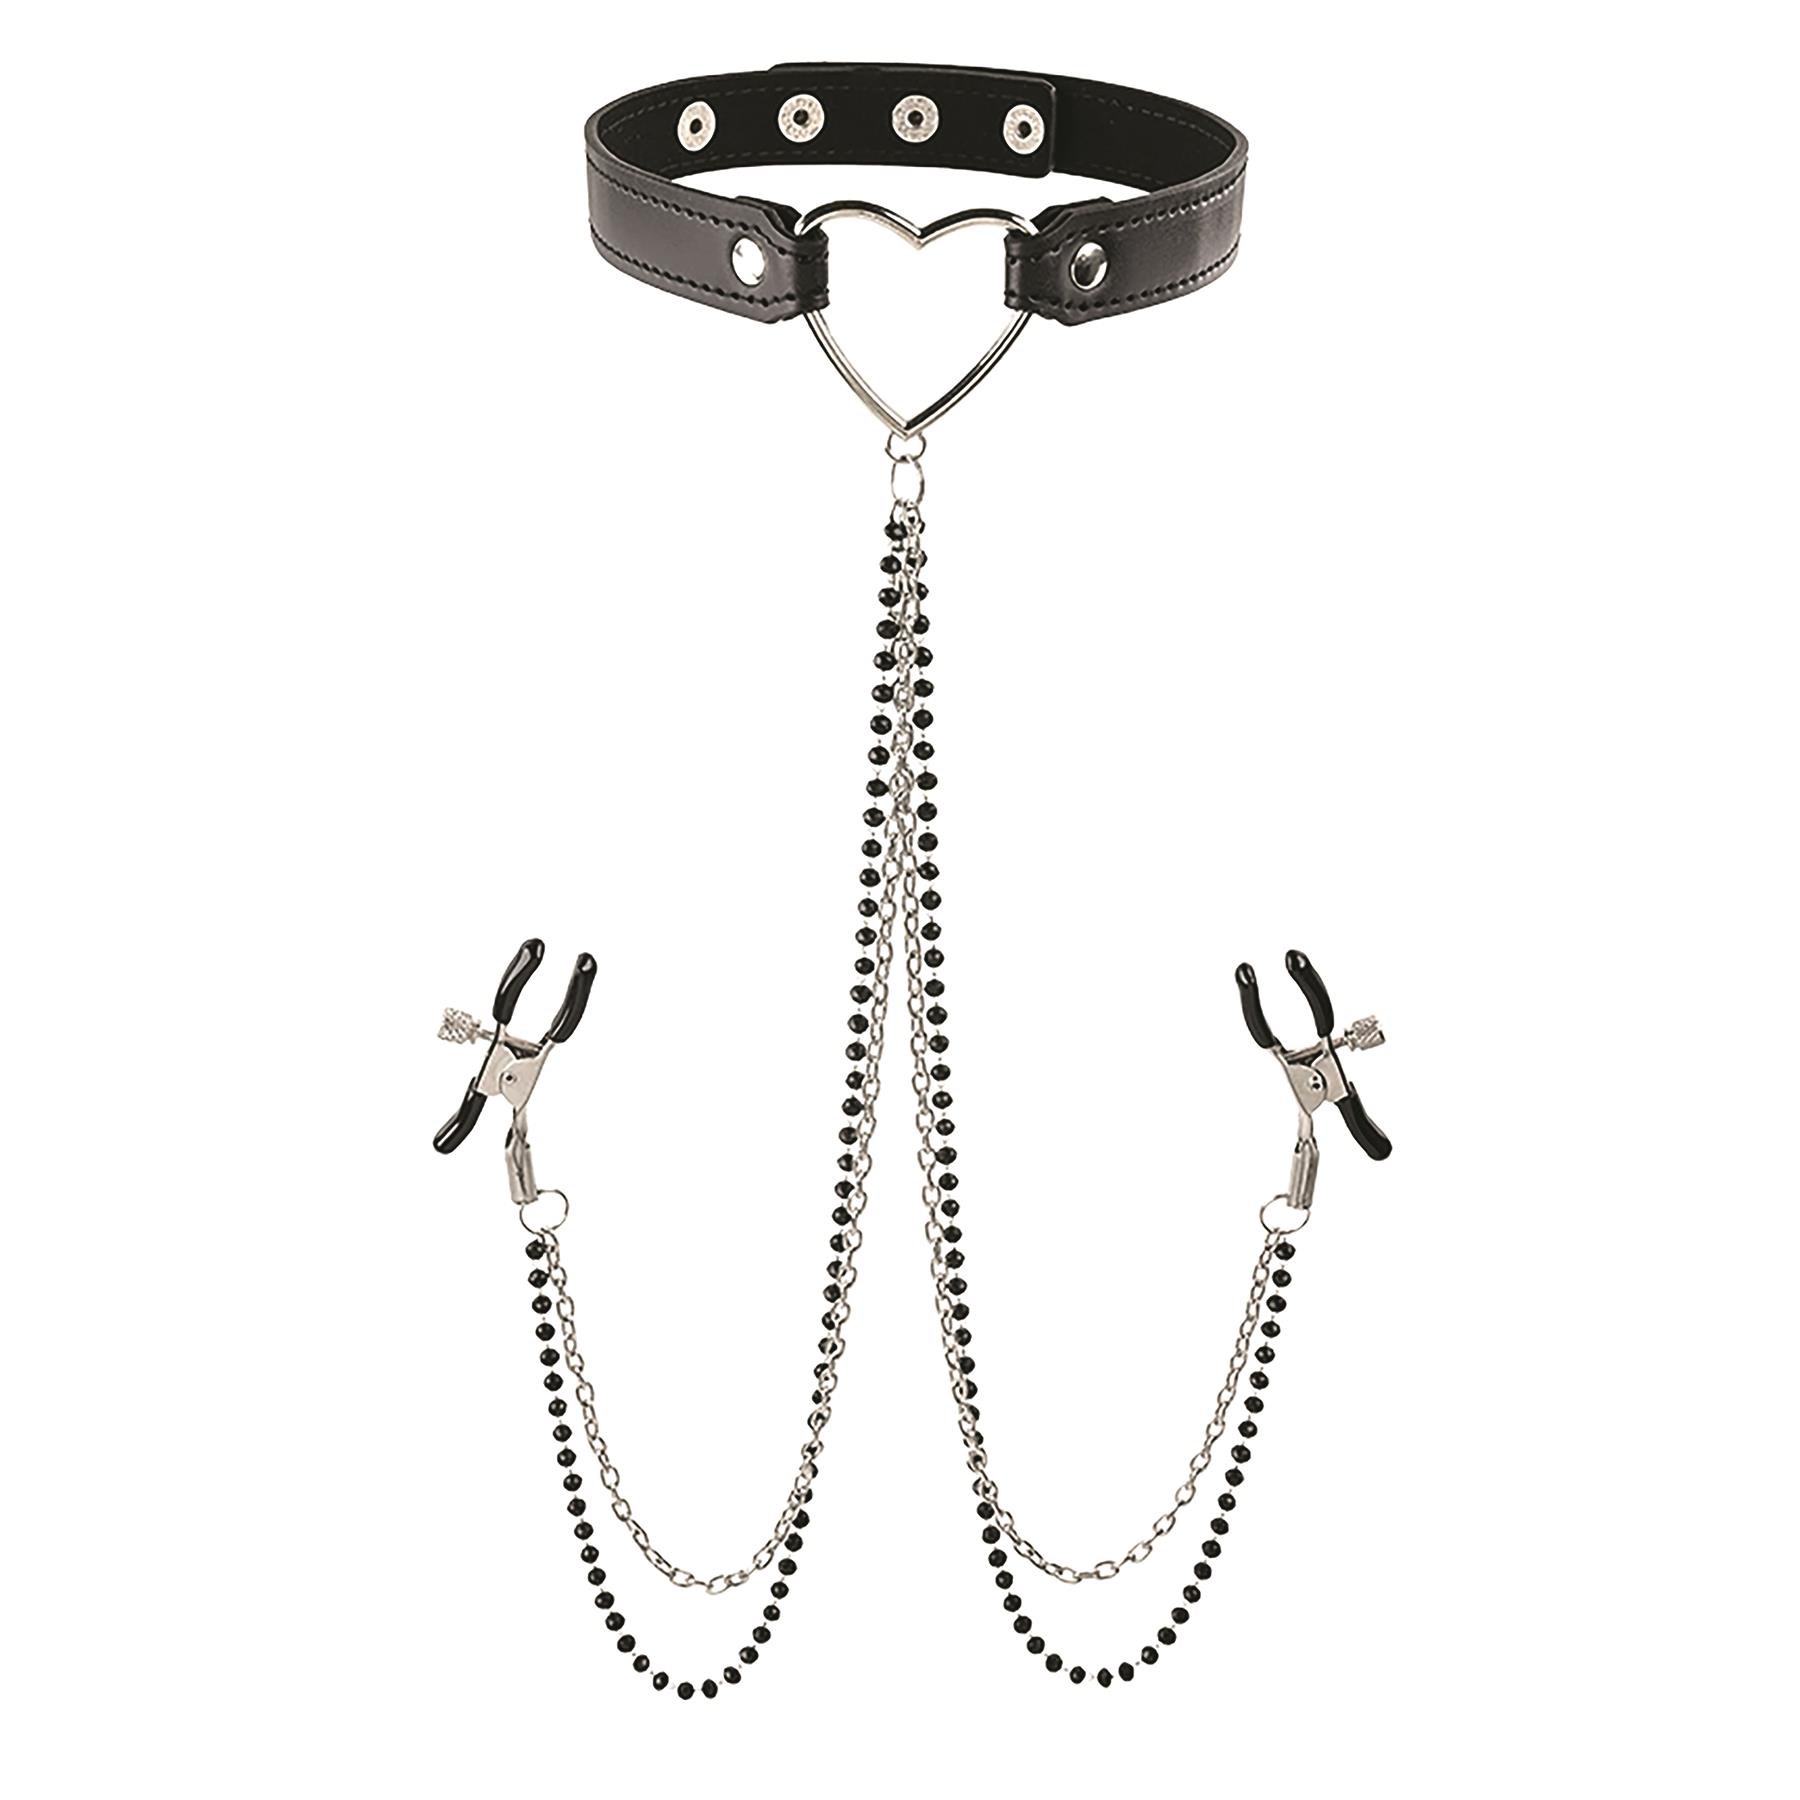 Sex & Mischief Amor Collar With Nipple Clamps - Product Shot